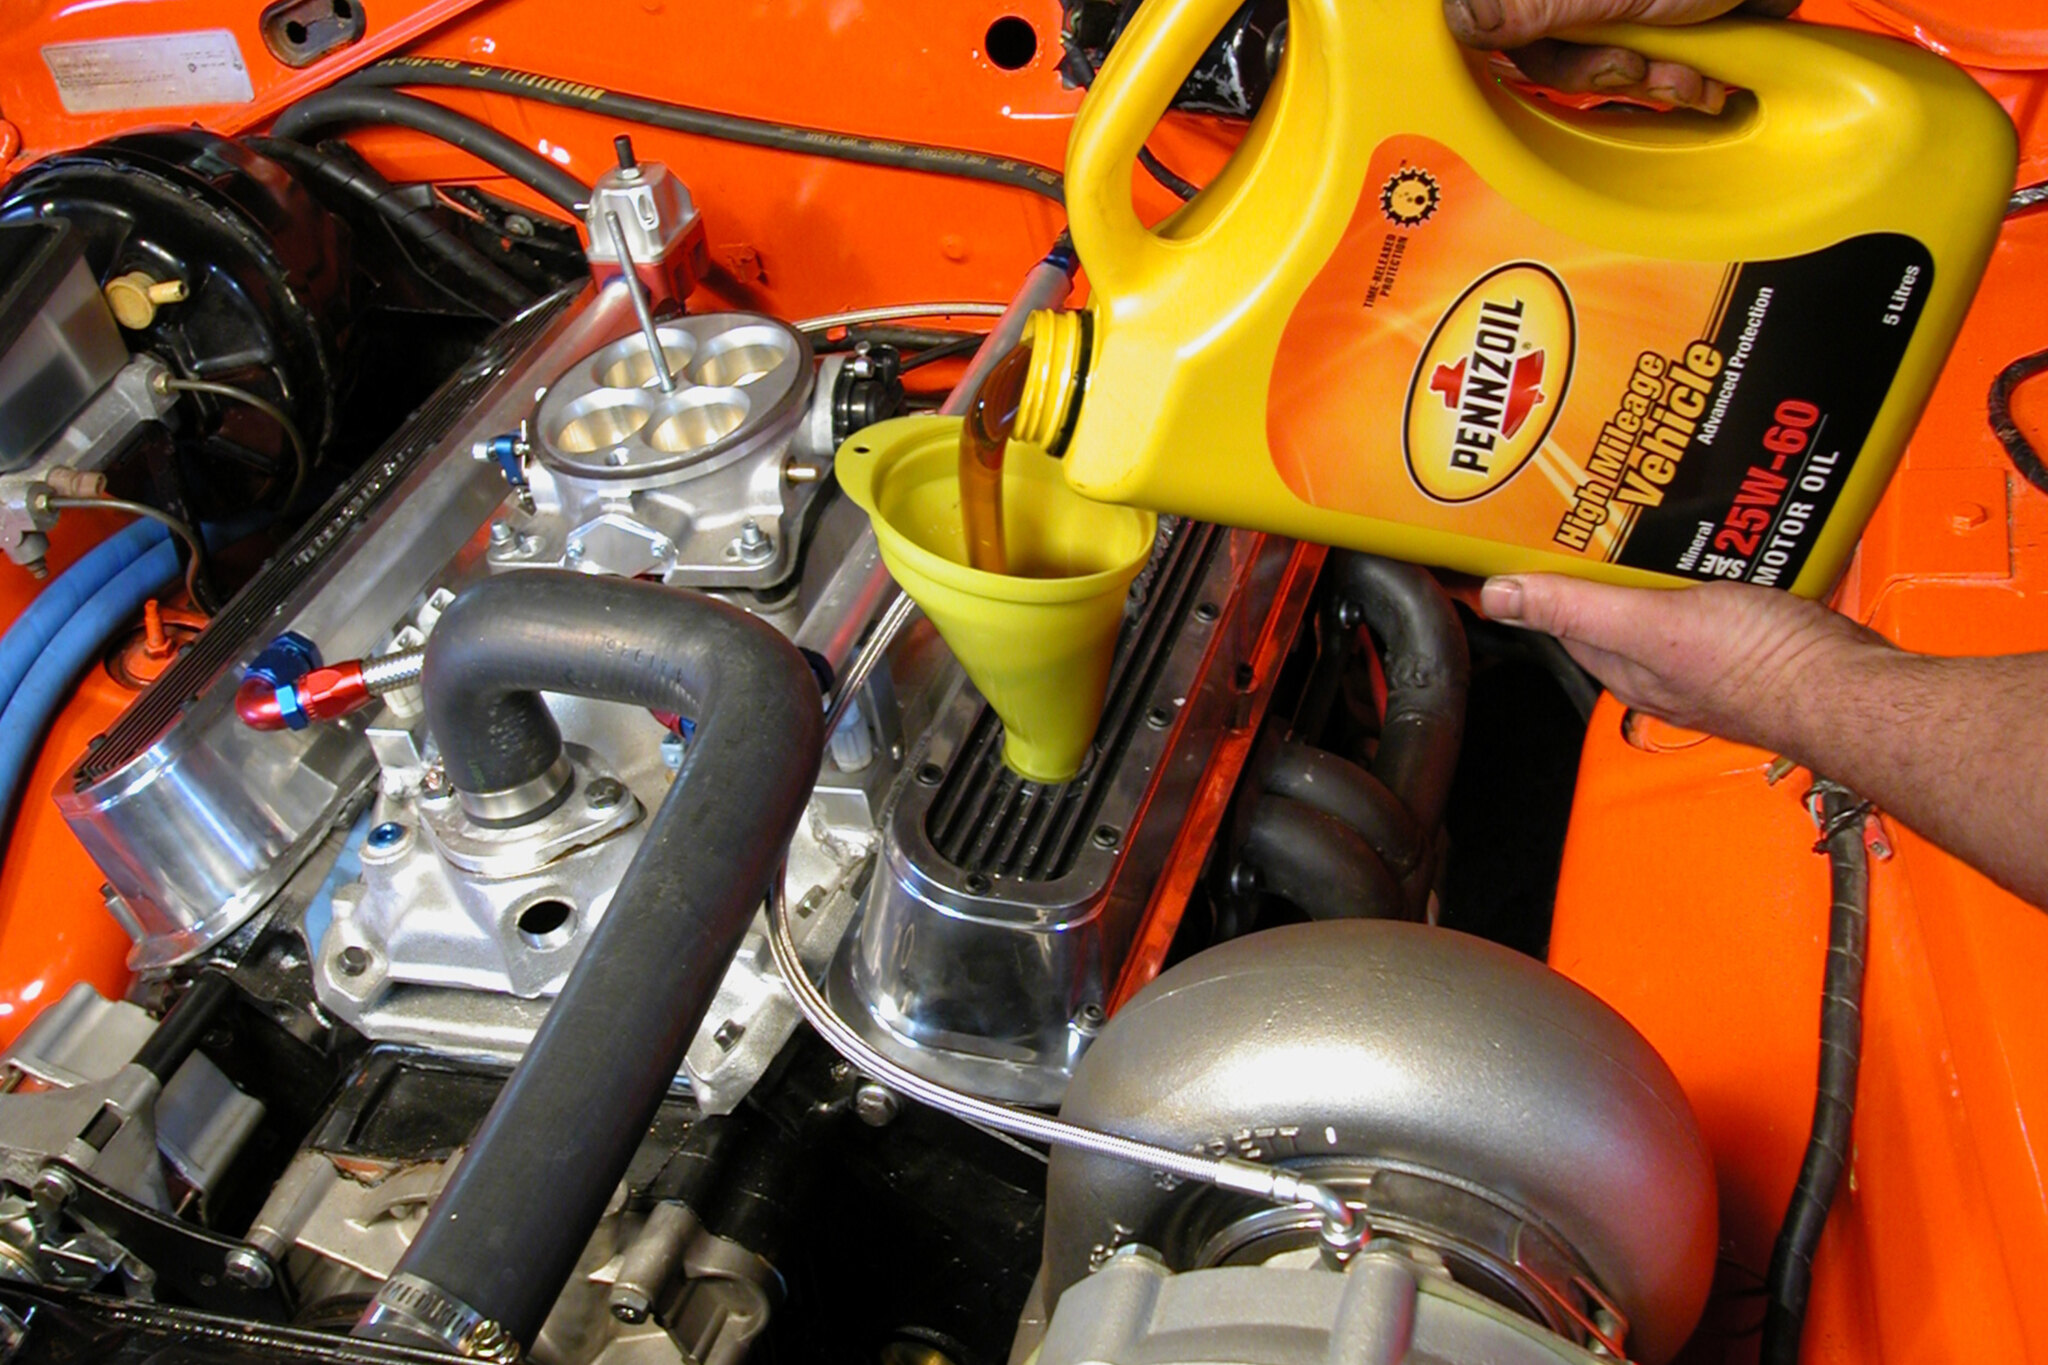 Tech: The basics of oil and your engine’s lubrication system